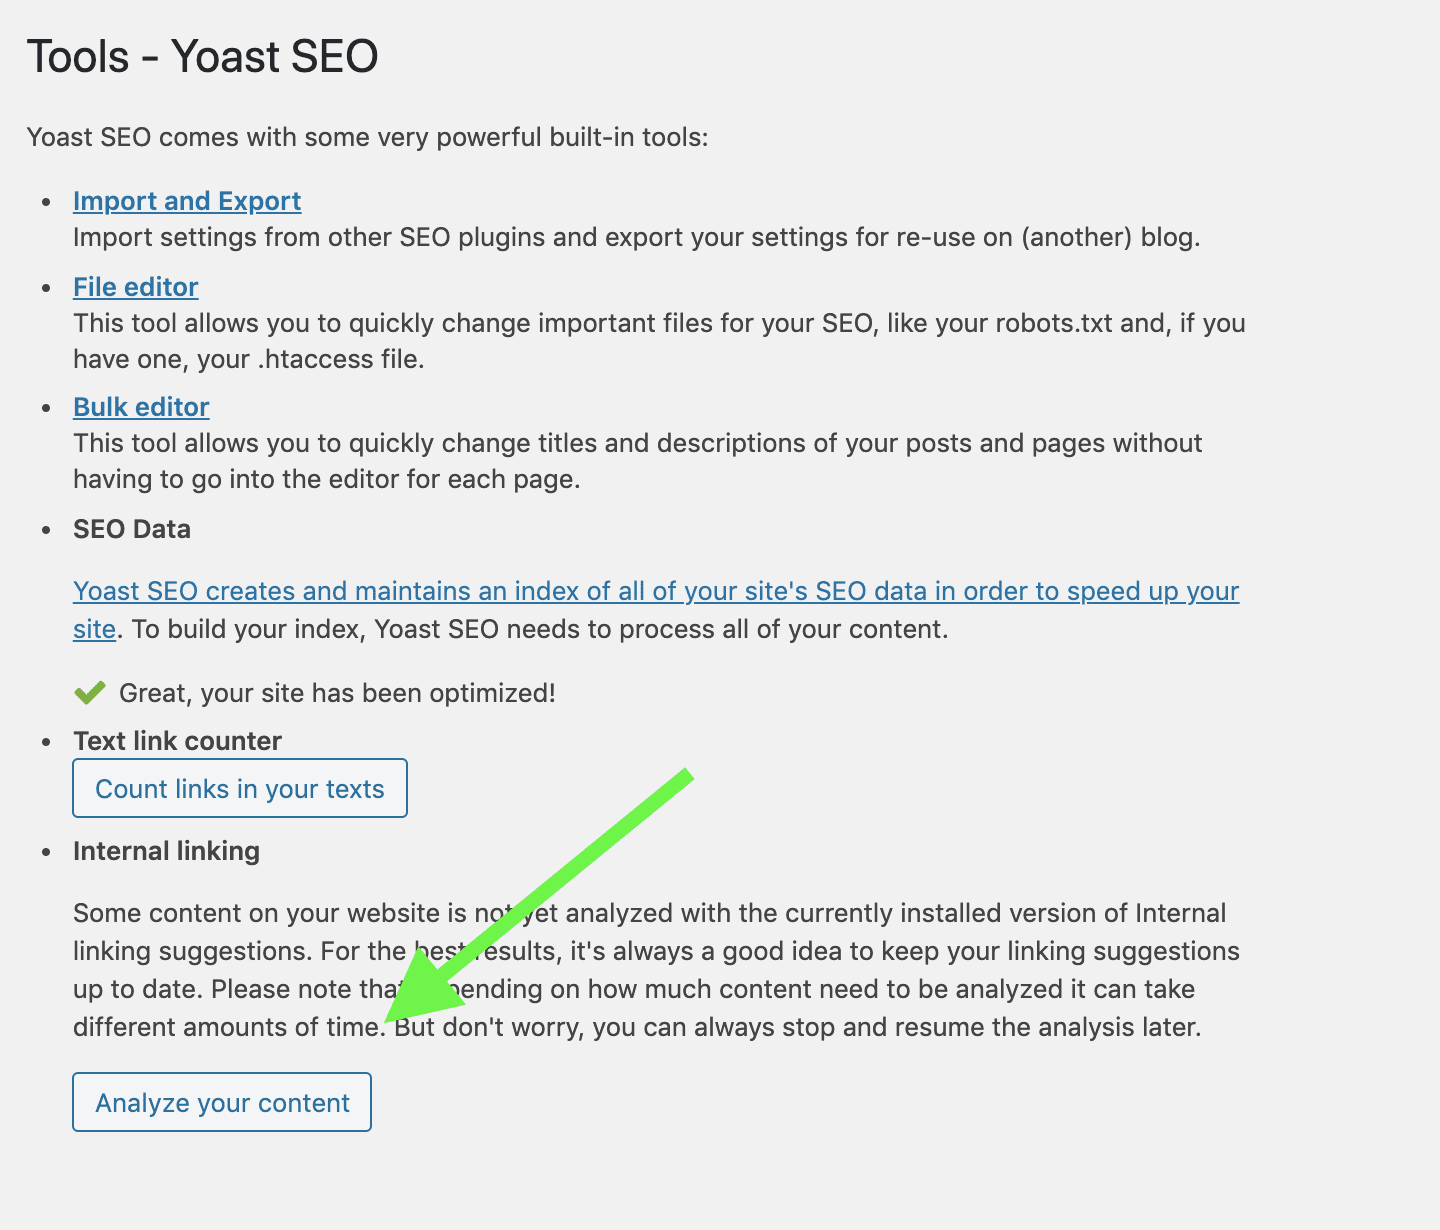 When you first upgrade to Yoast SEO Premium, you'll see a notification calling you to allow Yoast to analyze your content. 